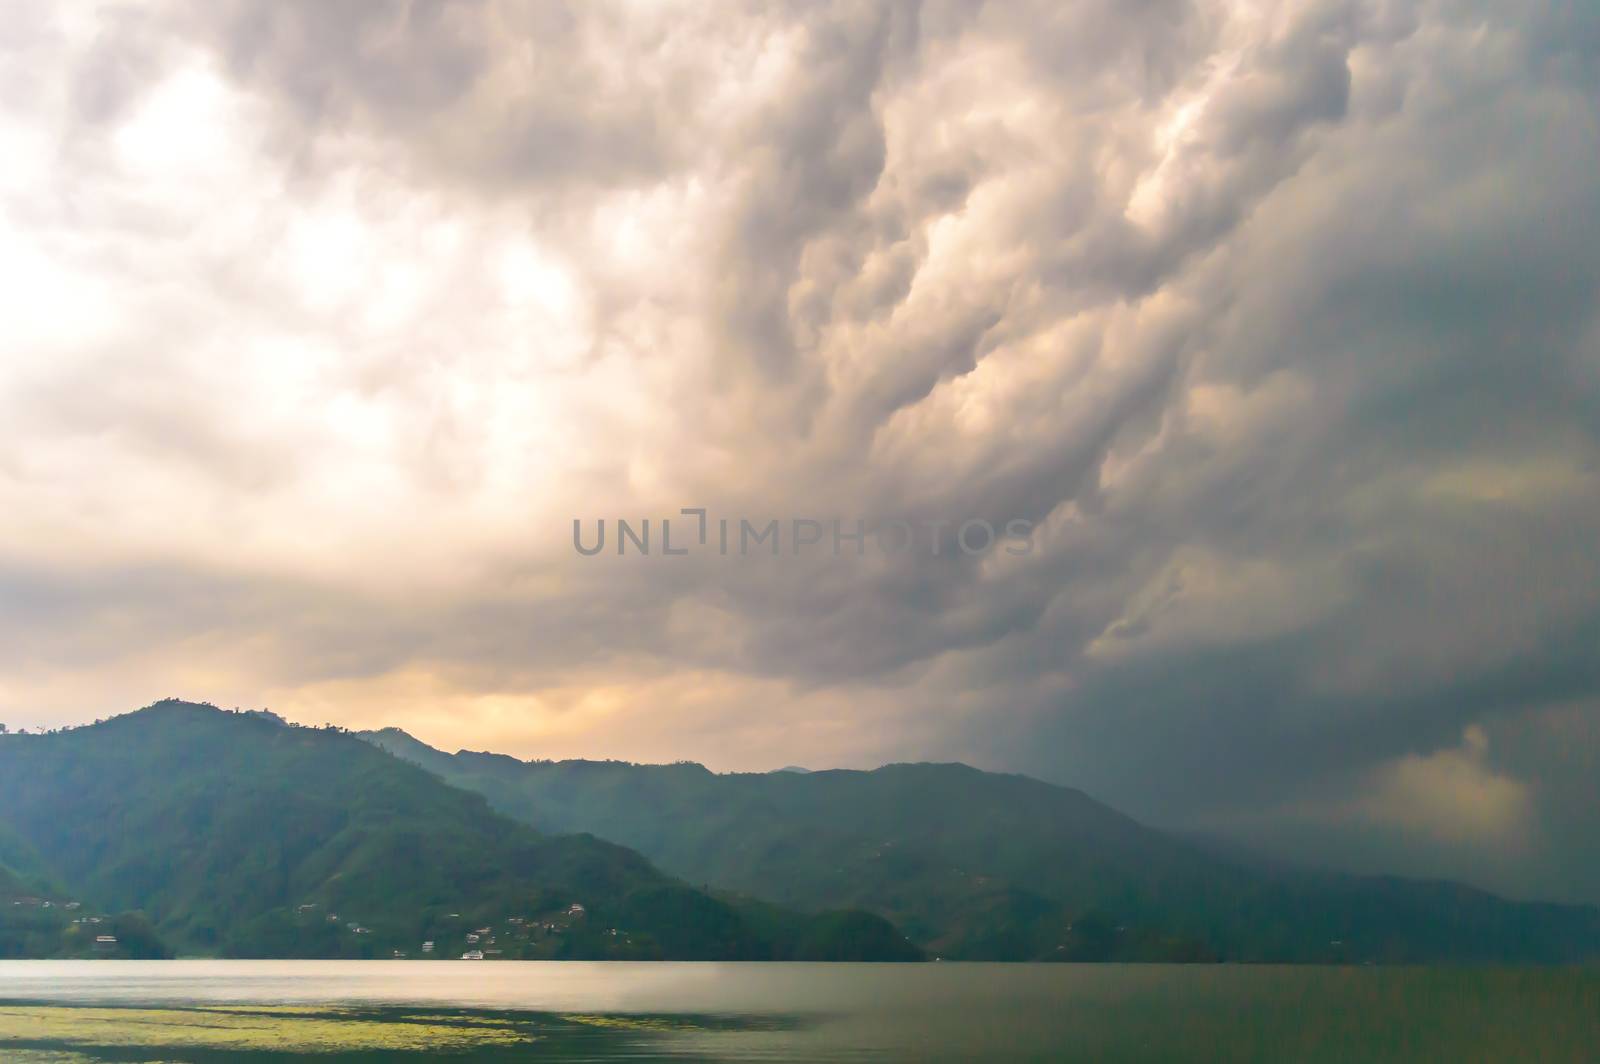 Photograph of cloud, lake, mountain and reflexion Near Pokhara Lake at Kathmandu Nepal. Snap in portrait, landscape, wide screen. Vintage film look. Nature Freedom, Vivid, Energy, Environment Concept. by sudiptabhowmick